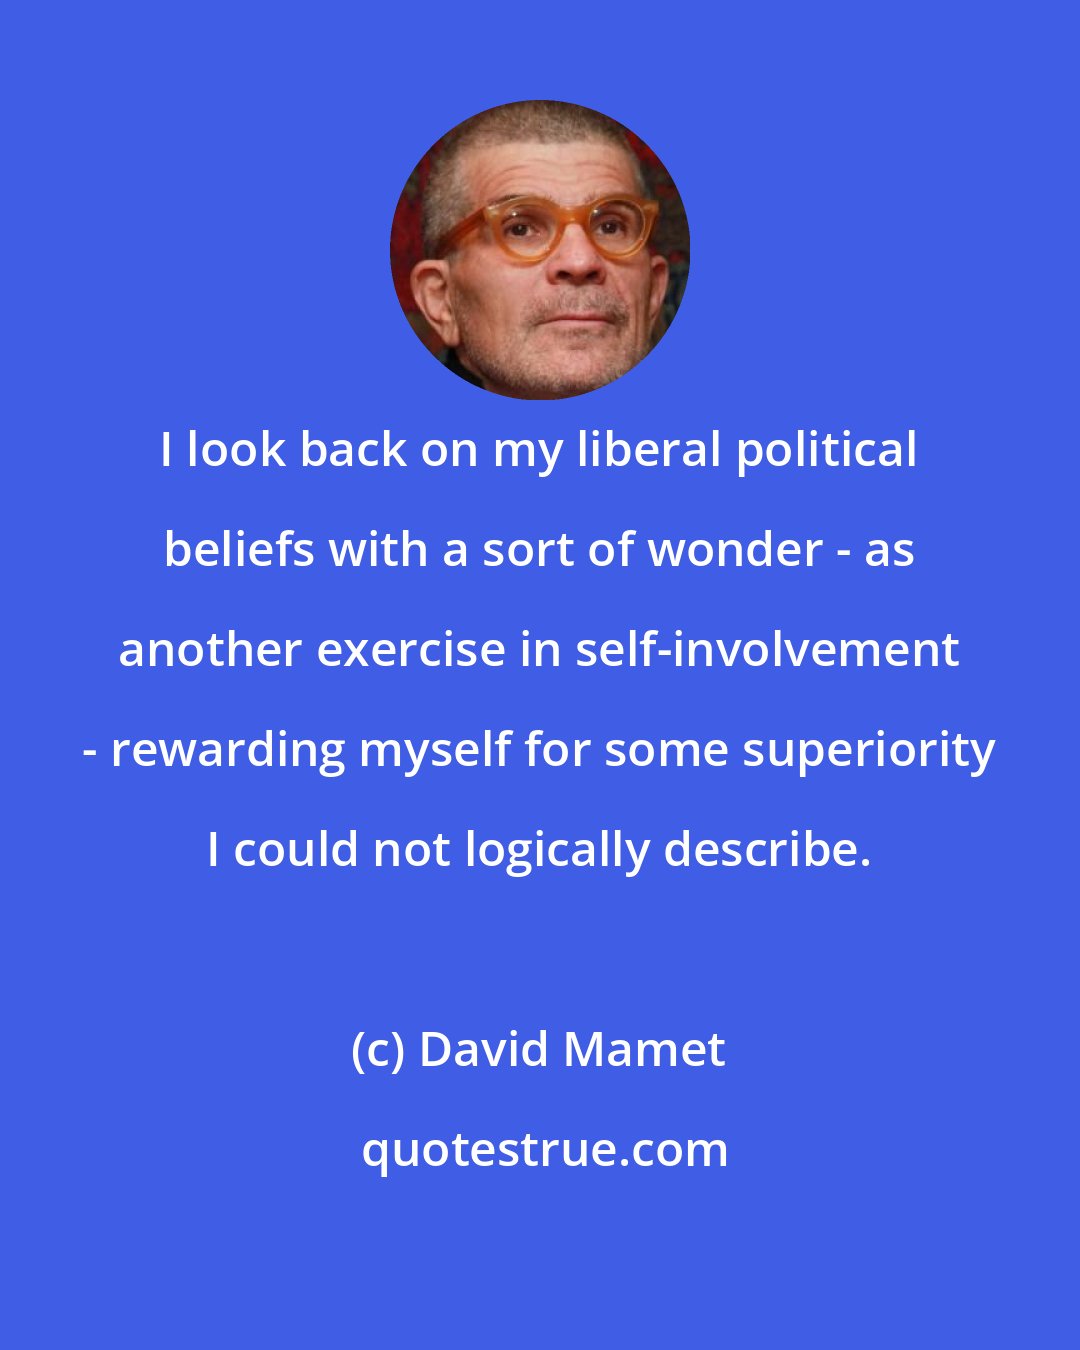 David Mamet: I look back on my liberal political beliefs with a sort of wonder - as another exercise in self-involvement - rewarding myself for some superiority I could not logically describe.